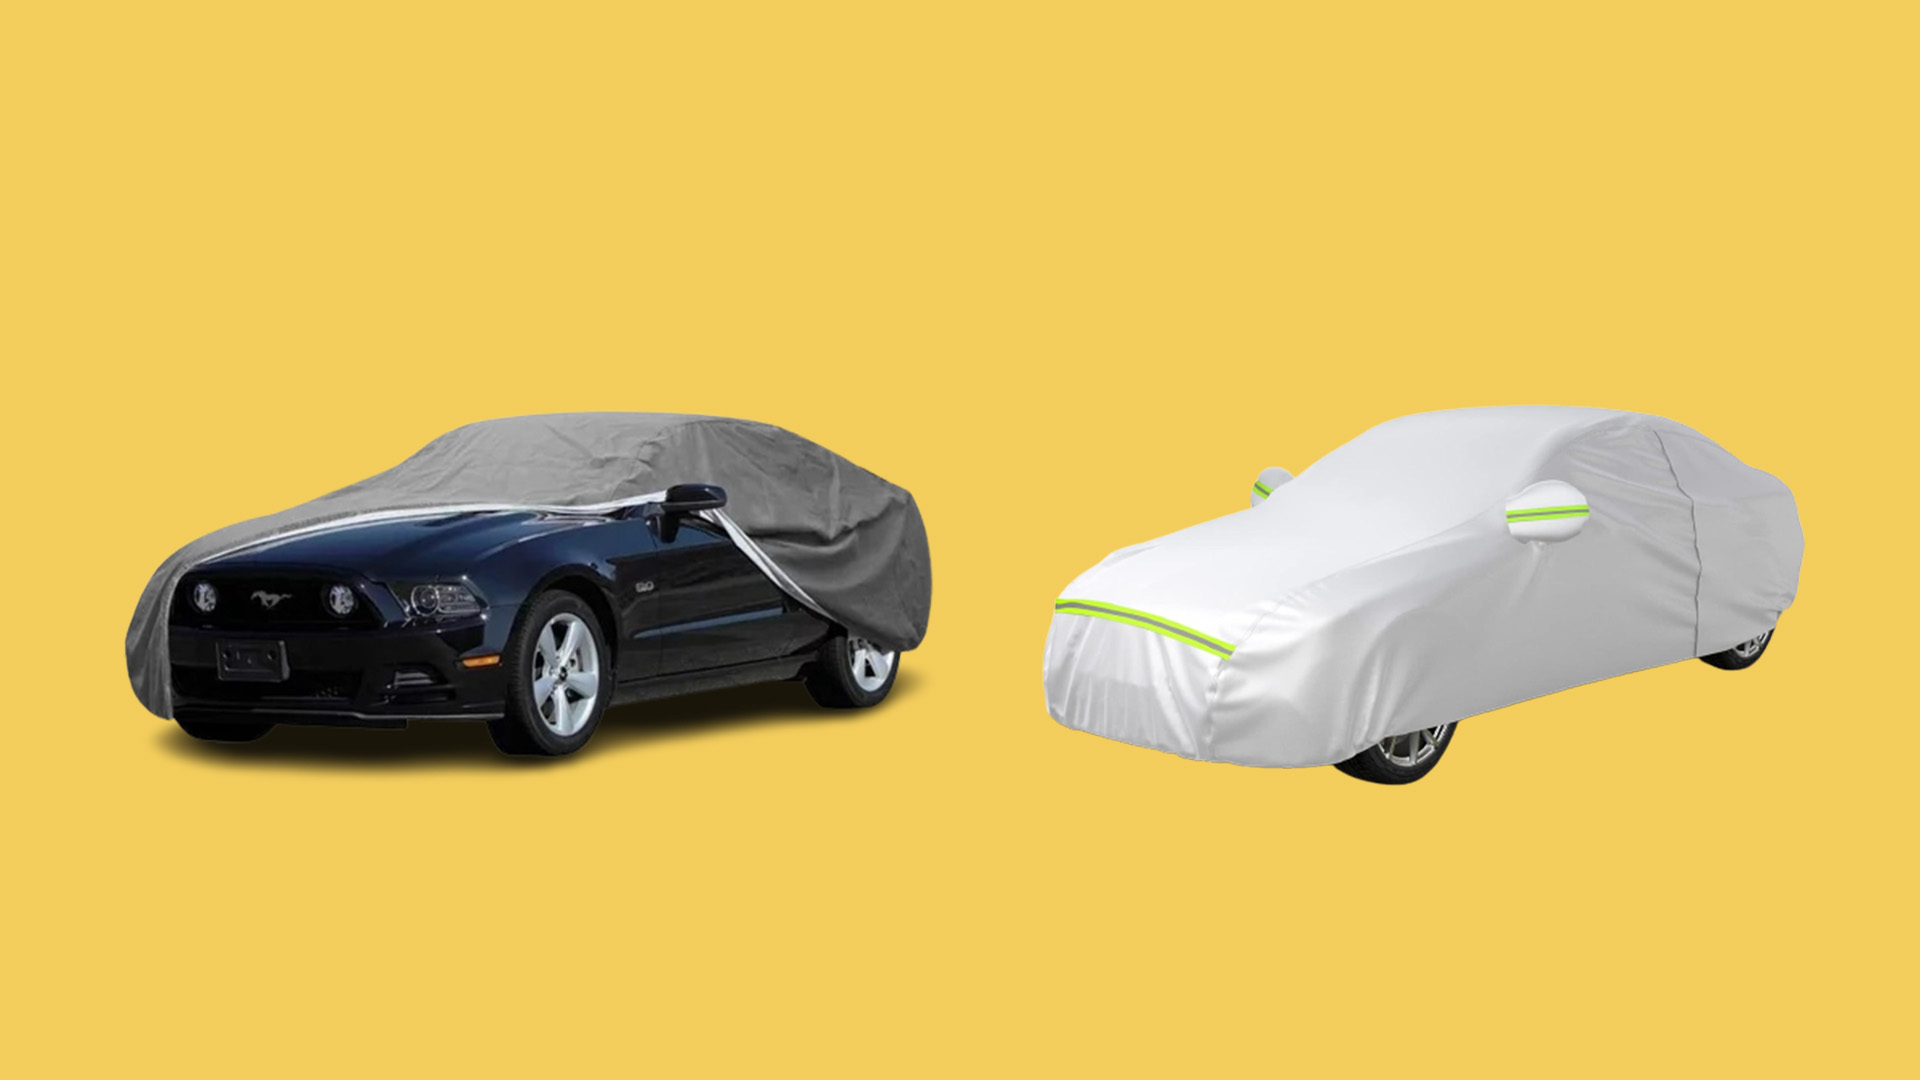 How To Choose A Car Cover For Outdoor Storage